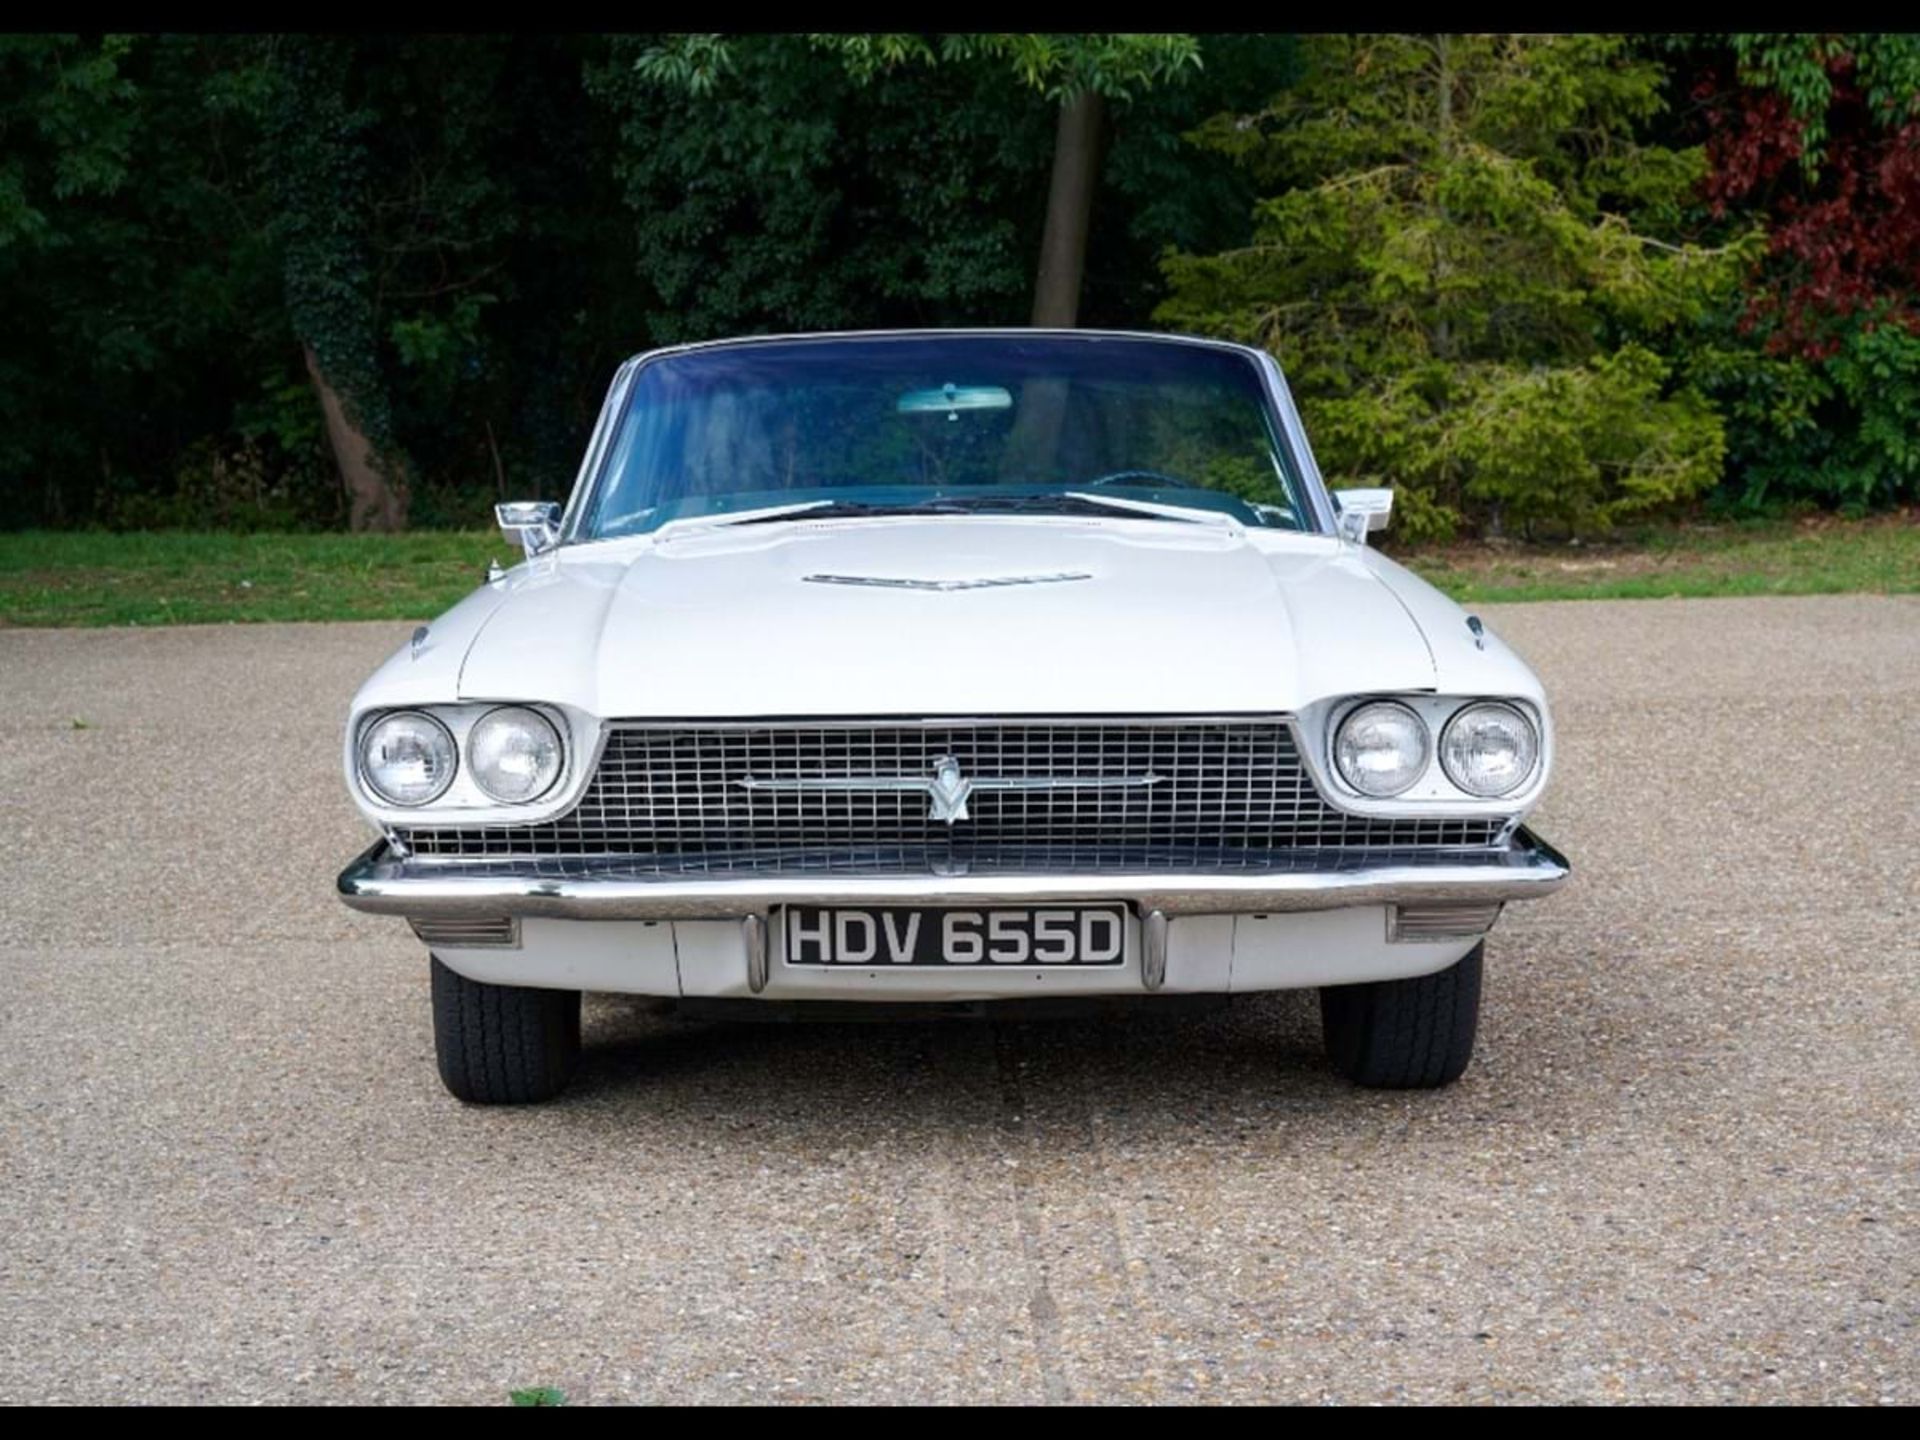 1966 Ford Thunderbird Convertible - Image 8 of 24